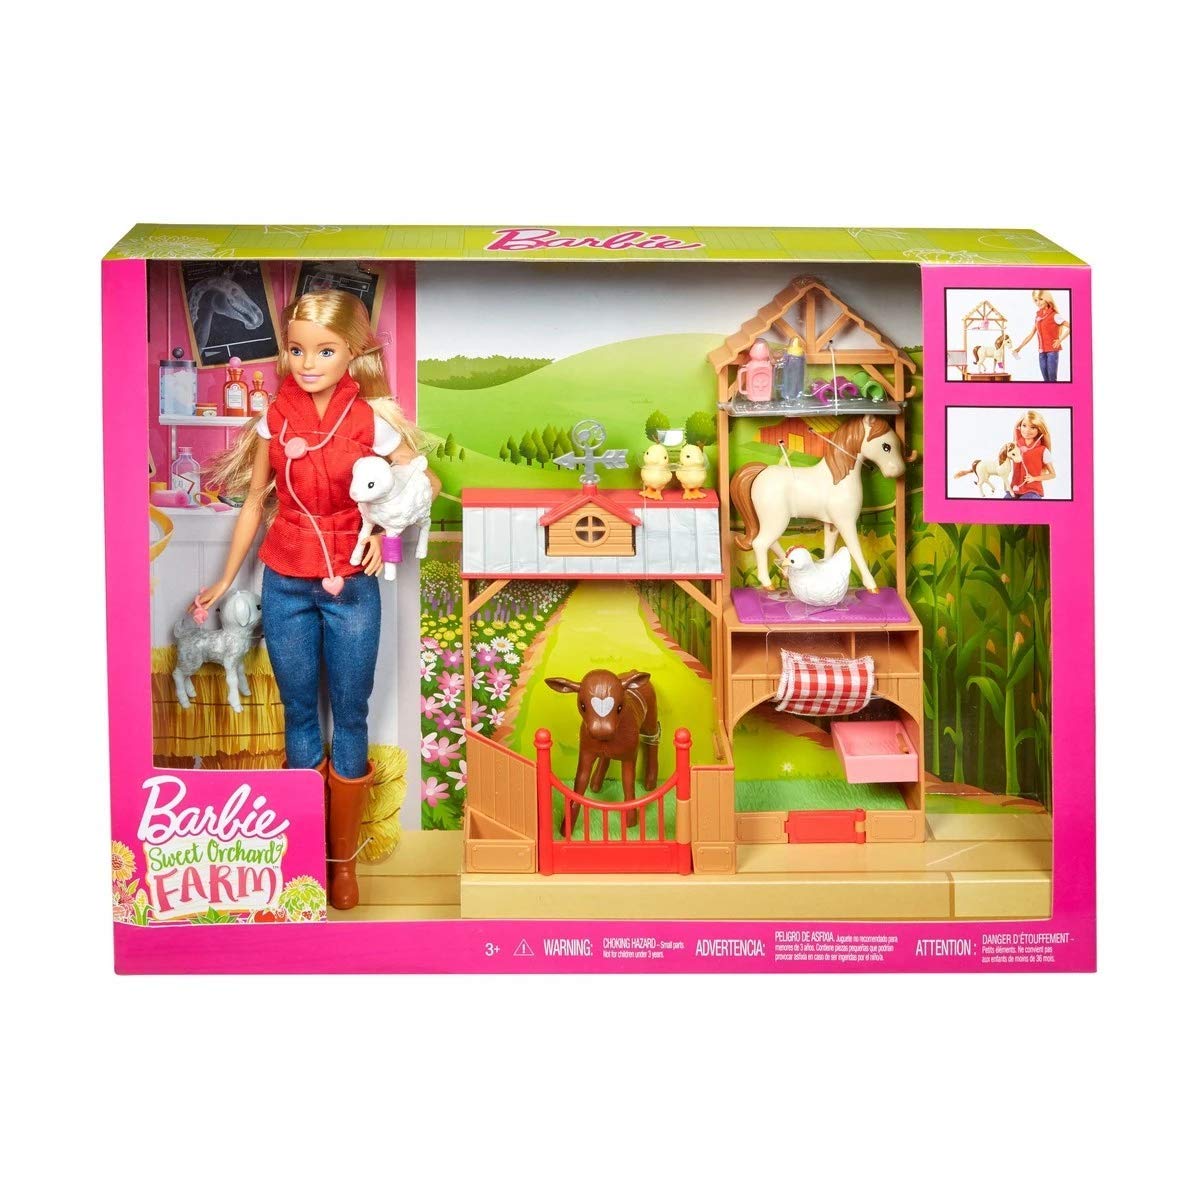 Barbie Sweet Orchard Farm Blonde Doll & Playset with 7 Animals GCK86